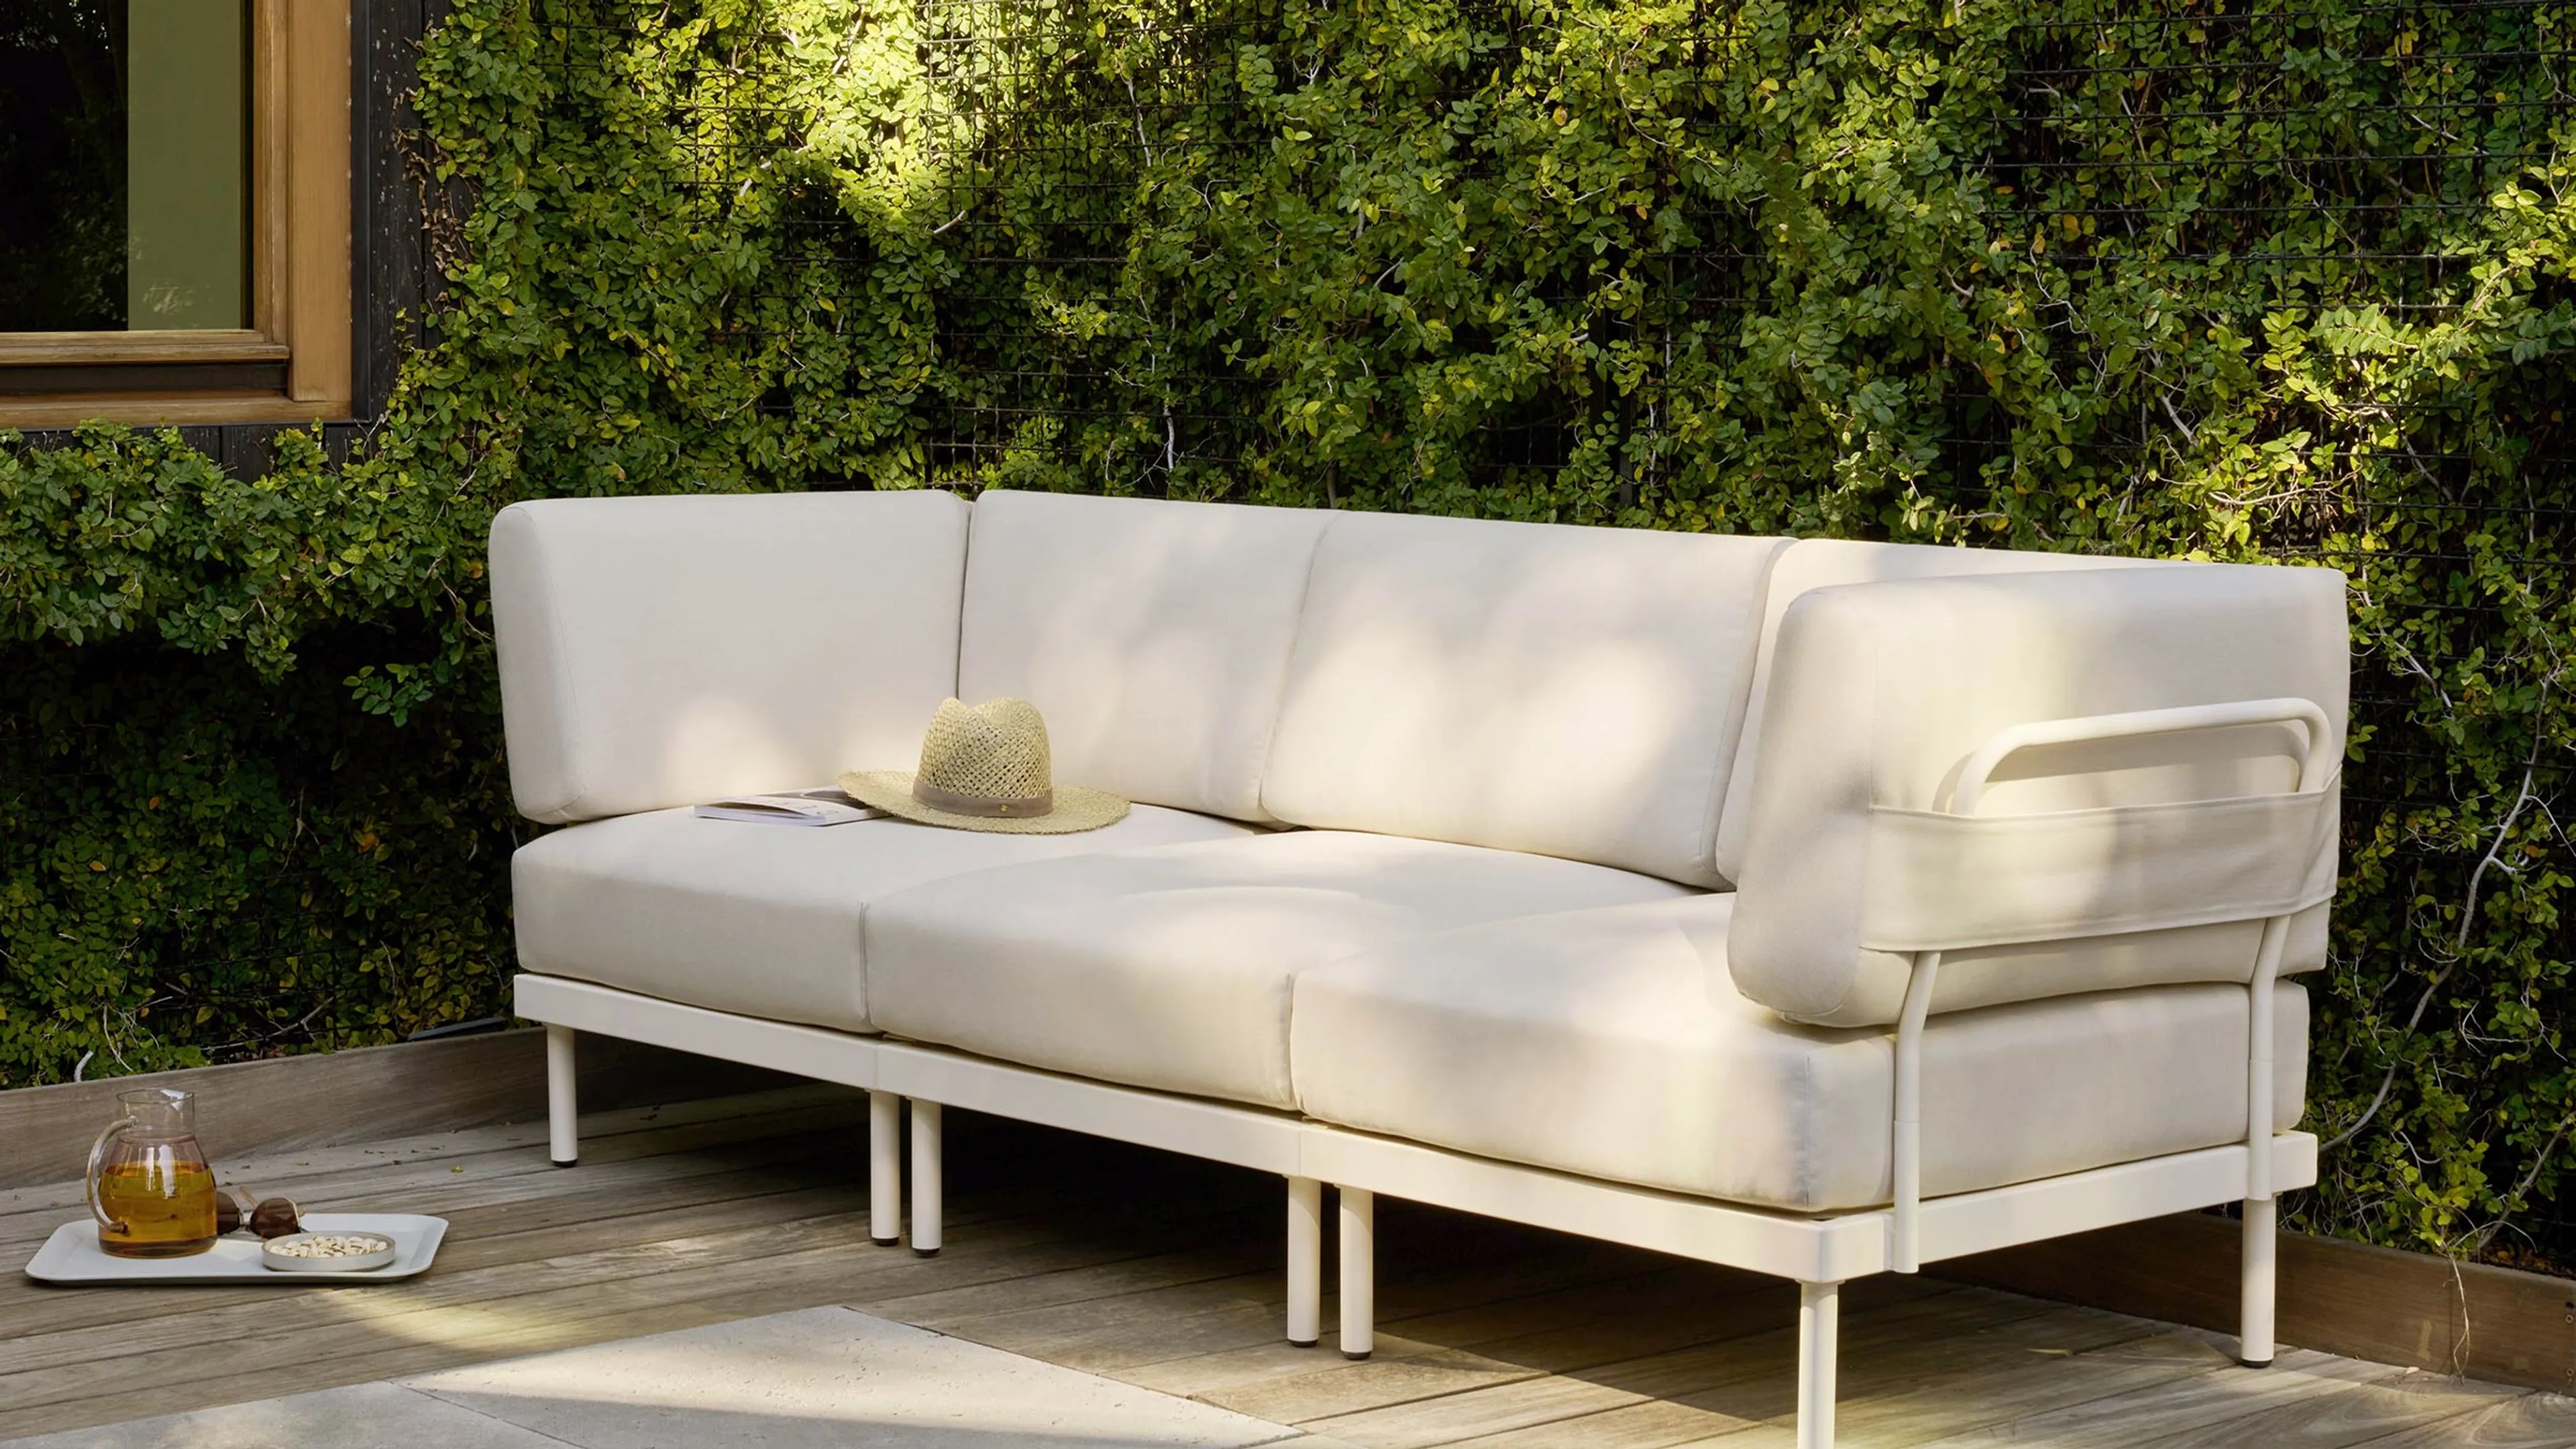 Two Relay Outdoor 3-Piece Sofas & Coffee Table Set